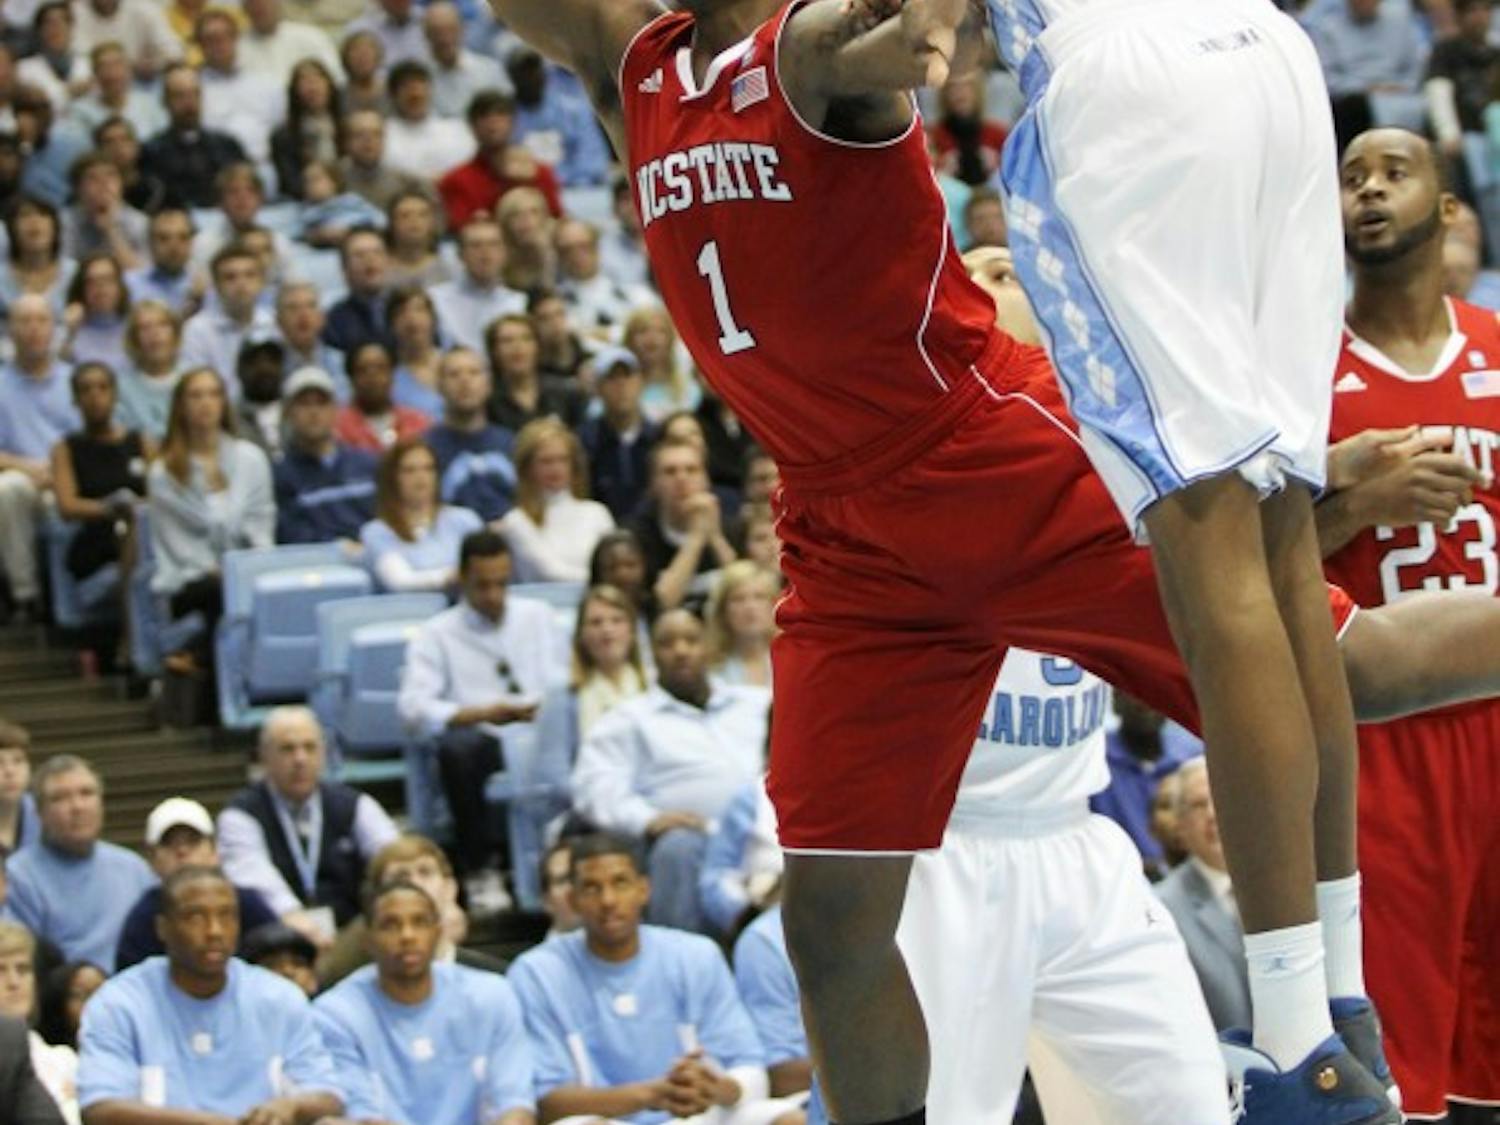 	UNC defeated the North Carolina State University Wolfpack 84-64 on Saturday, January 29 at the Dean E. Smith Center.